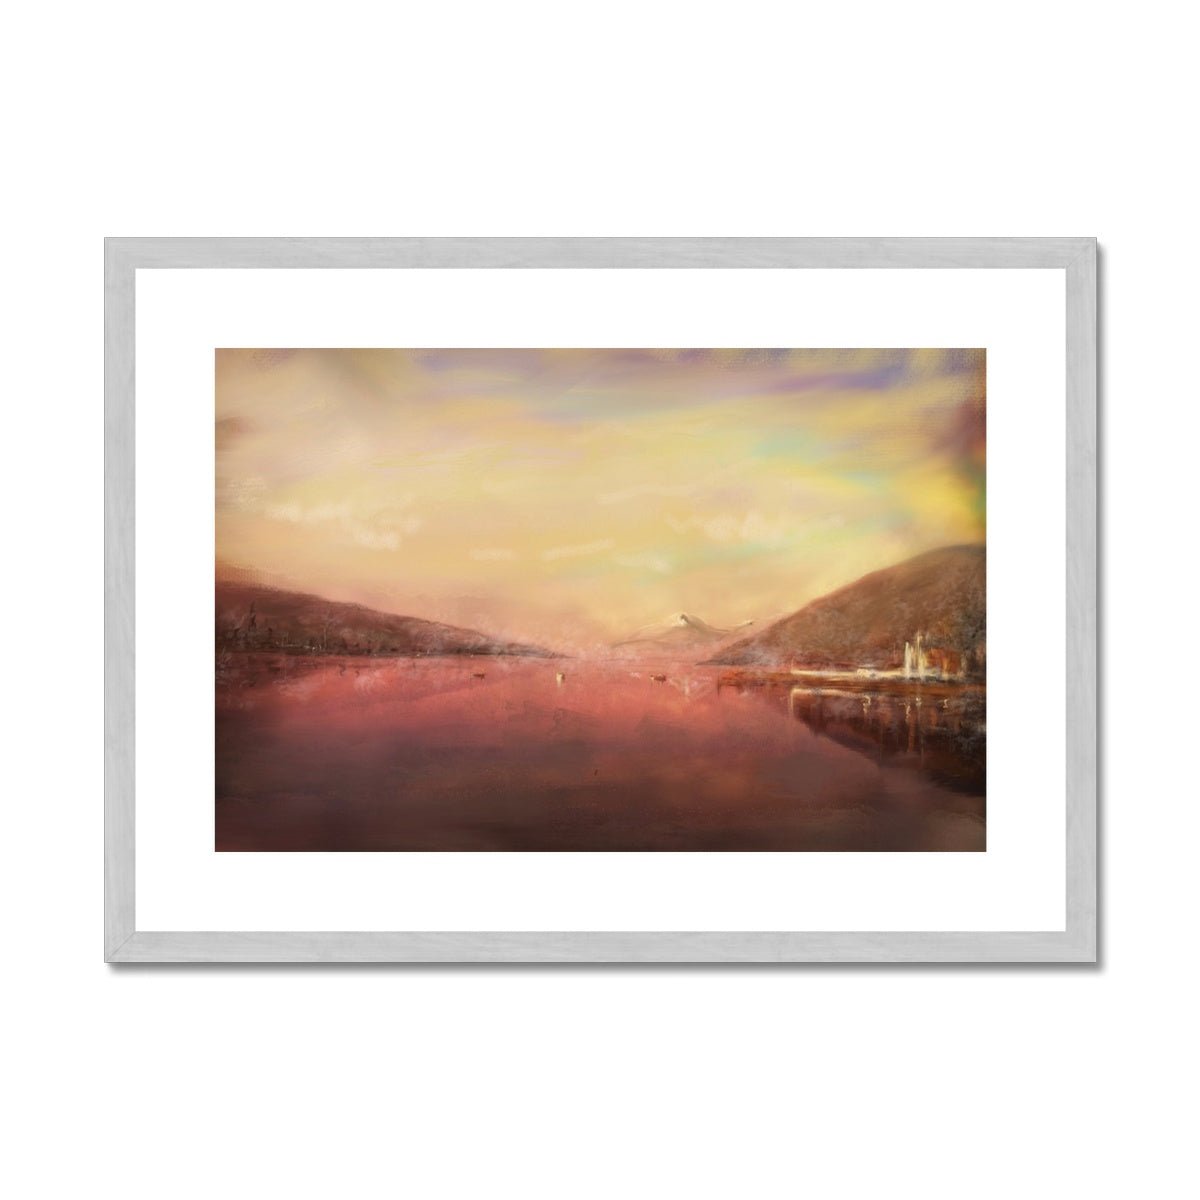 Loch Tay Painting | Antique Framed & Mounted Prints From Scotland-Antique Framed & Mounted Prints-Scottish Lochs & Mountains Art Gallery-A2 Landscape-Silver Frame-Paintings, Prints, Homeware, Art Gifts From Scotland By Scottish Artist Kevin Hunter